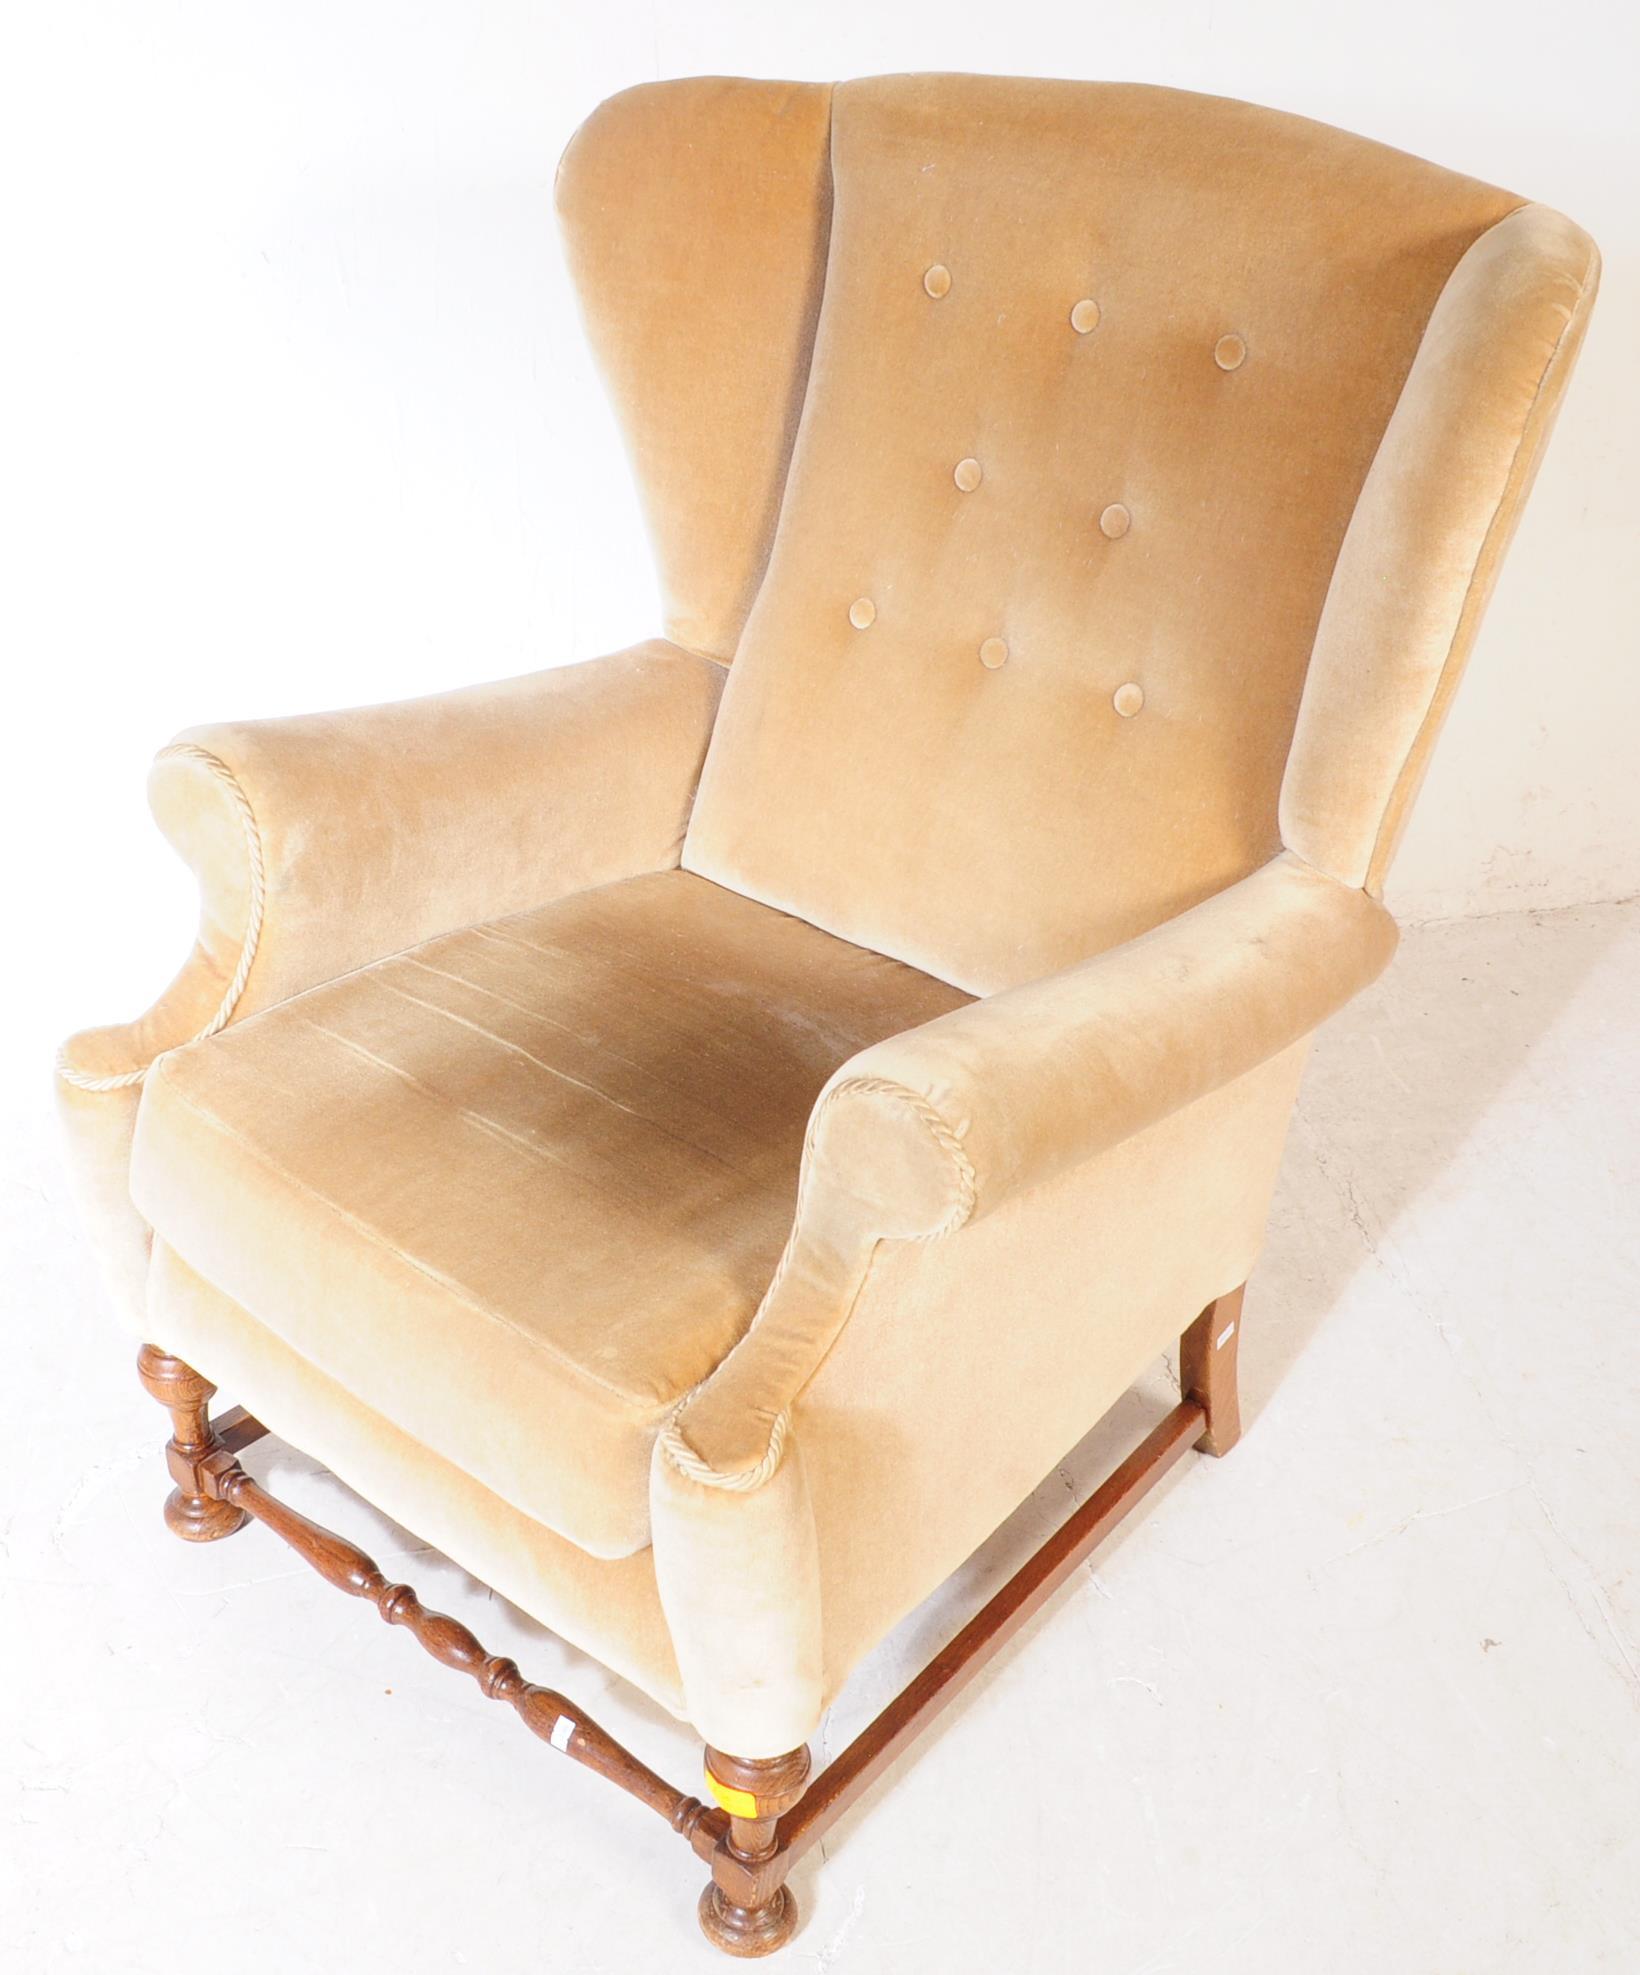 VINTAGE 20TH CENTURY OAK WING BACK ARMCHAIR - Image 4 of 4